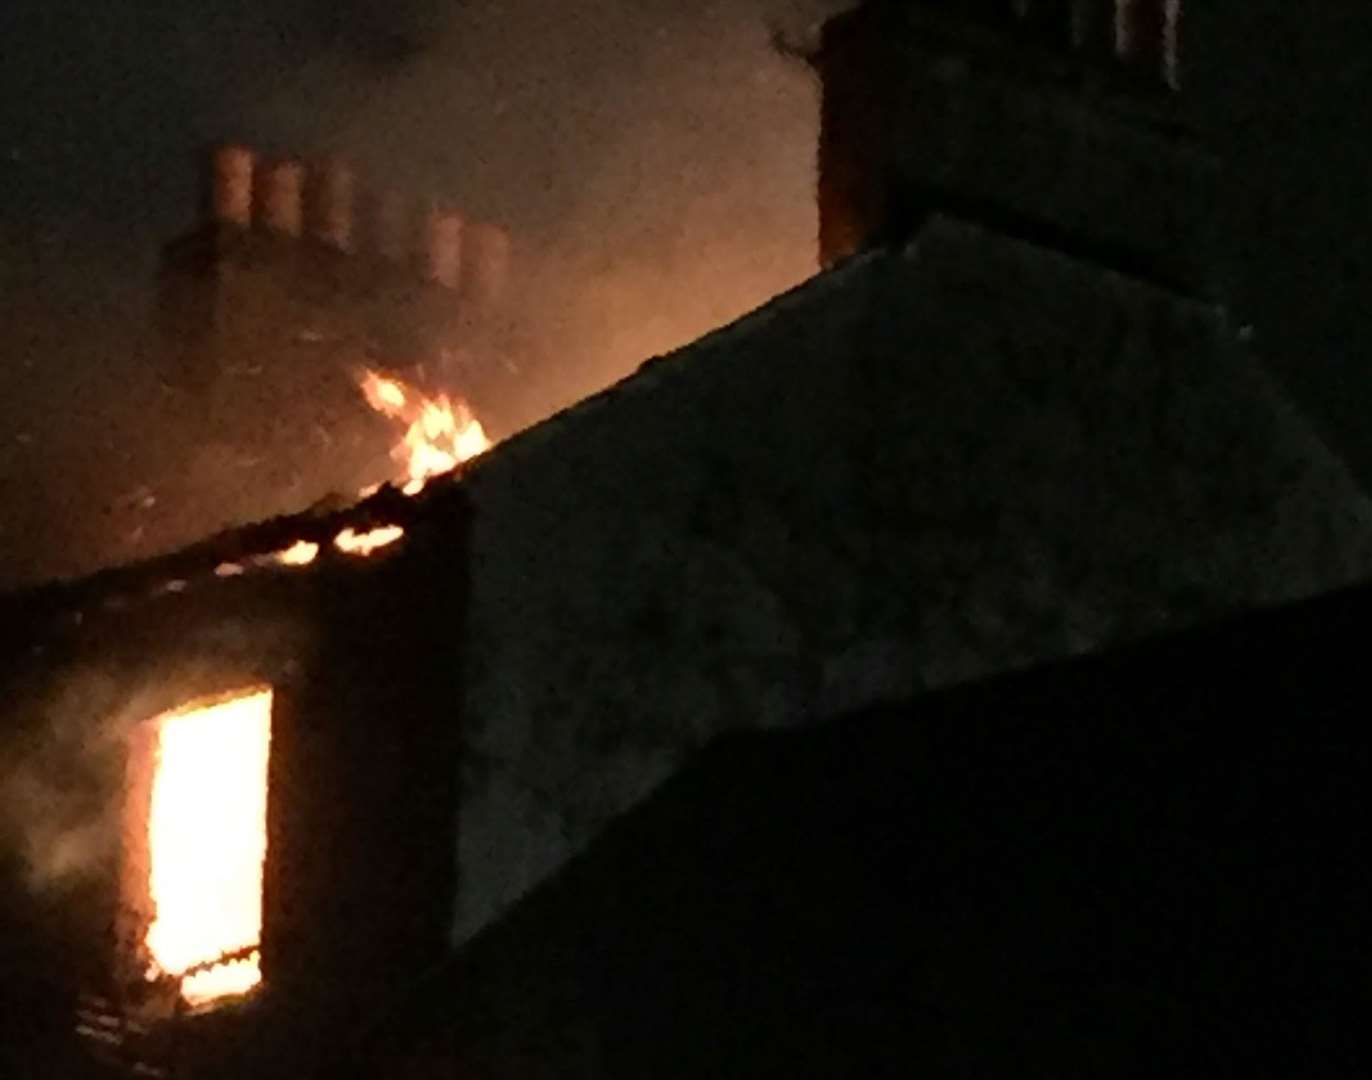 The fire in Clarendon Street, Dover, last night. Credit: Ryan Burrows